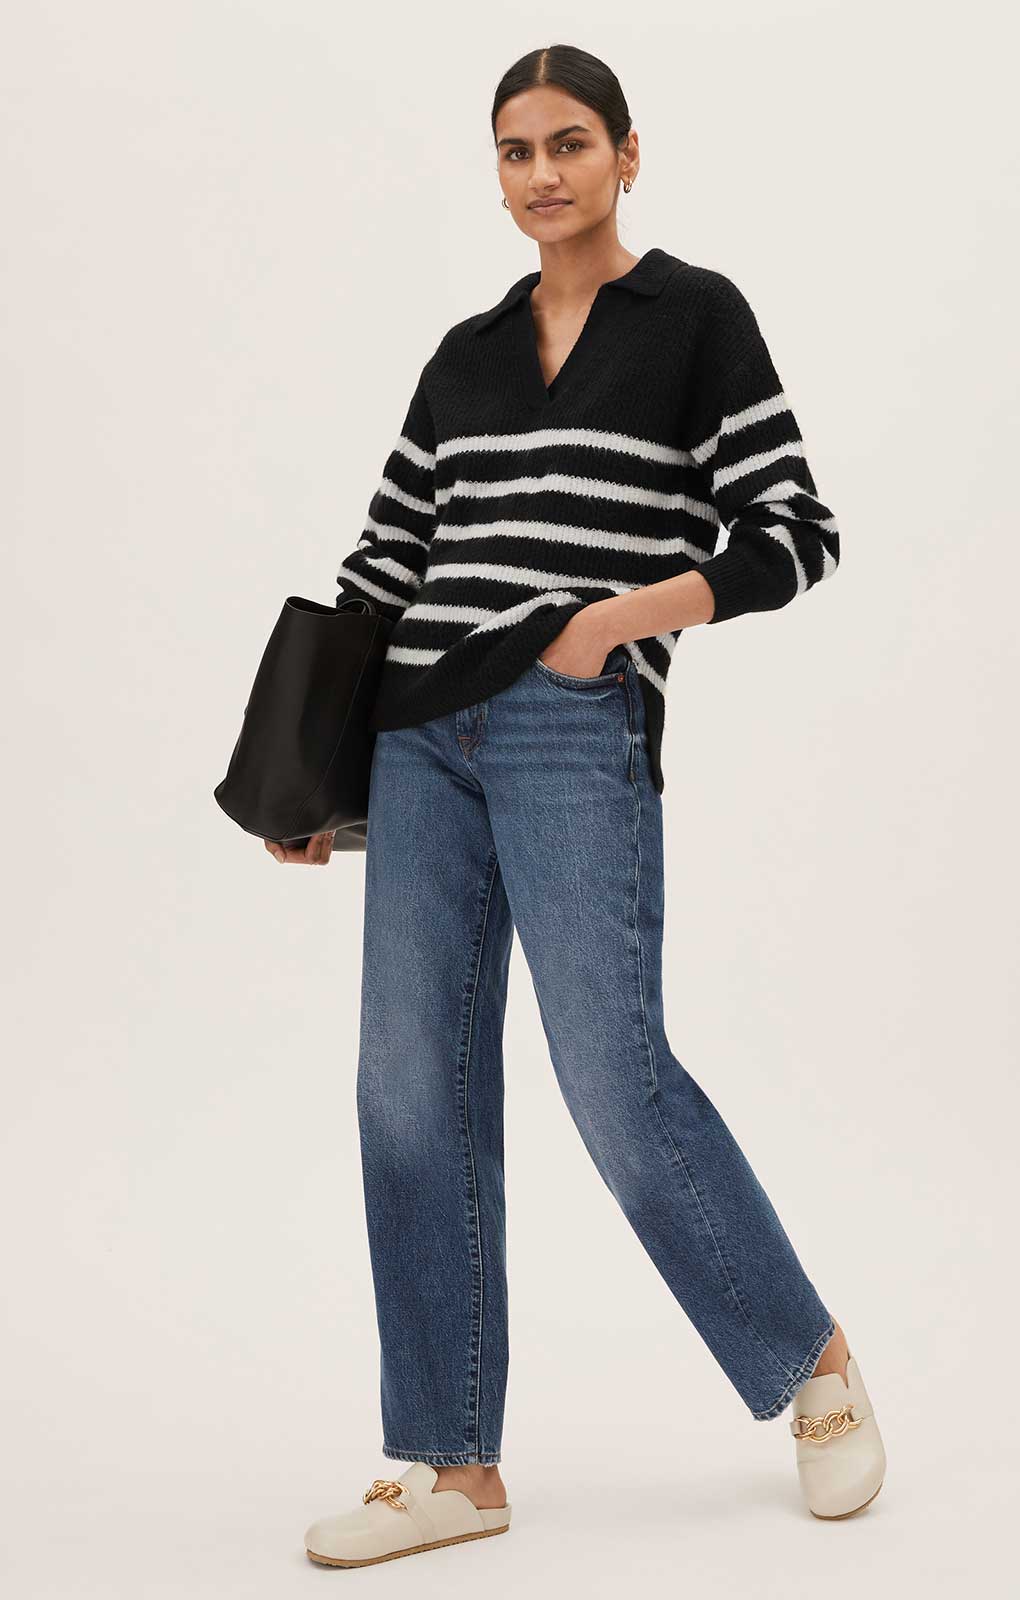 M&S Striped Collared Jumper product image